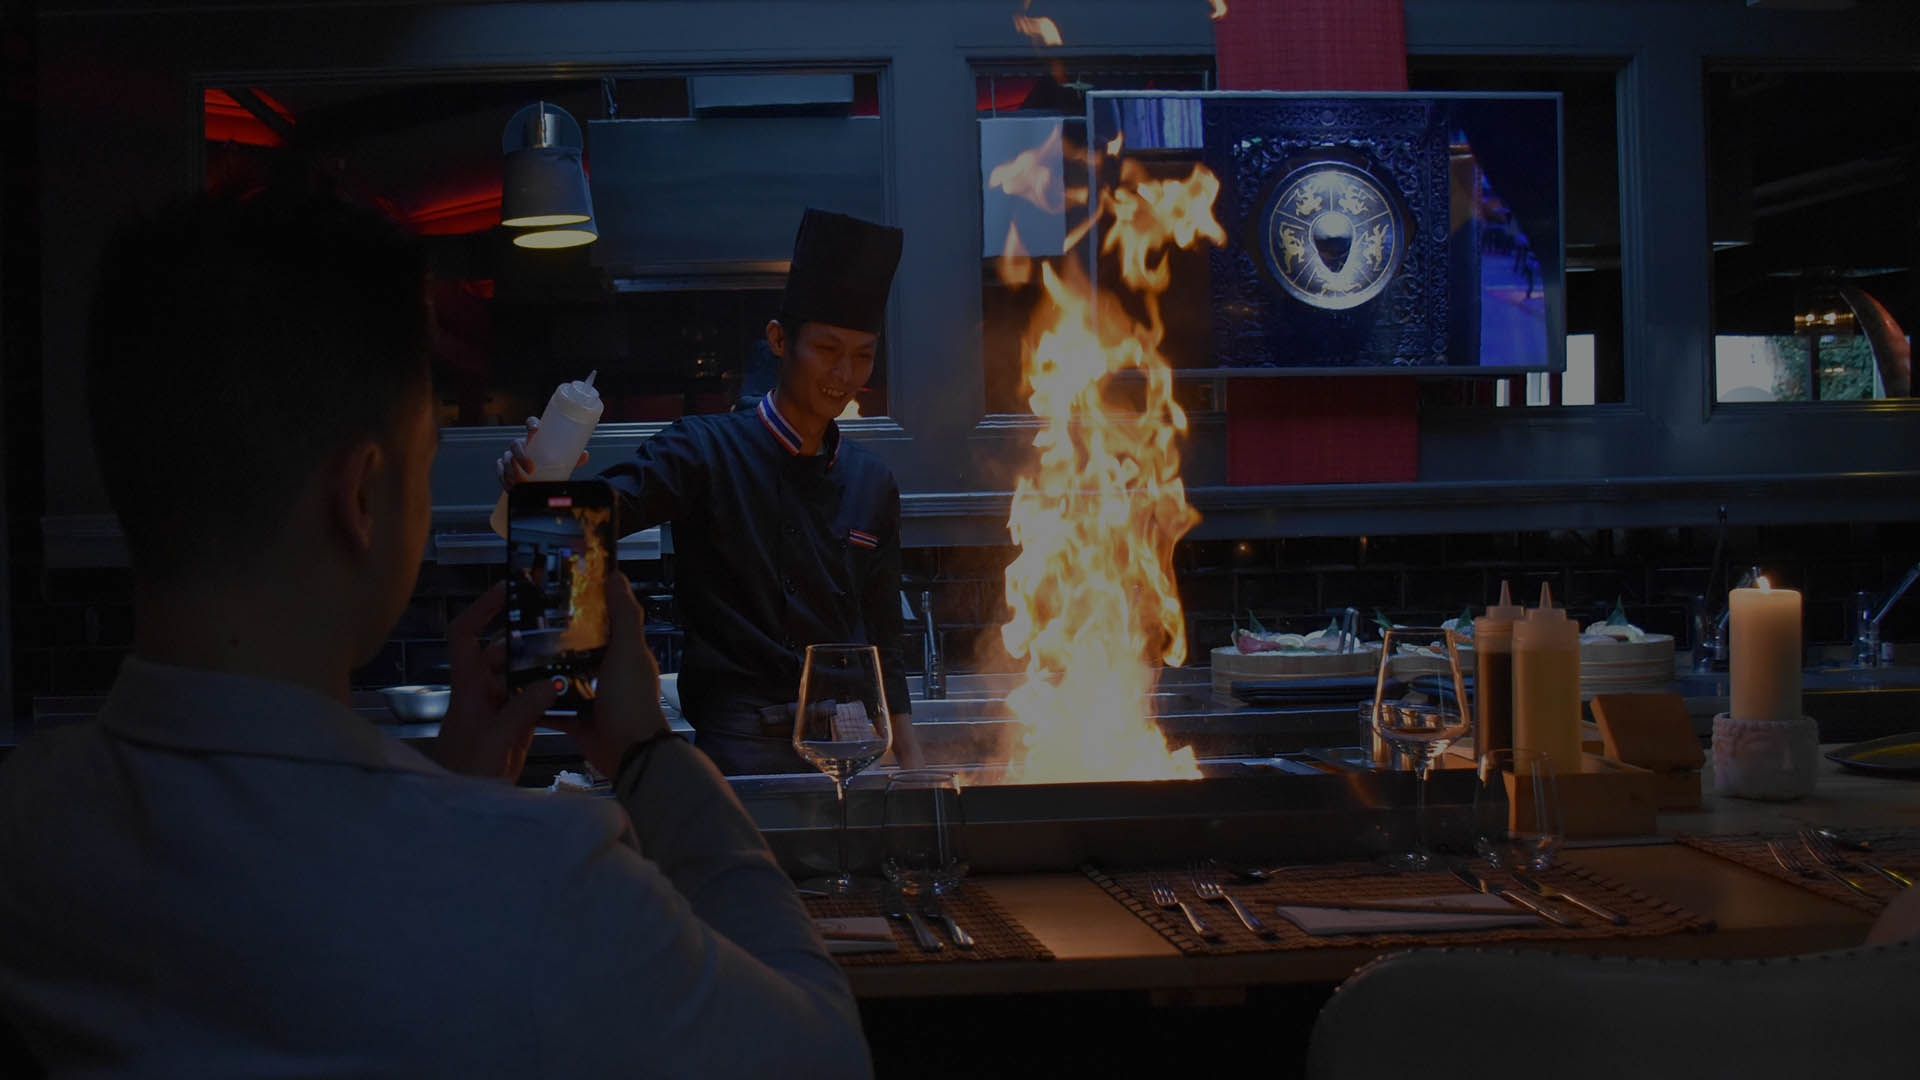 We are opening a unique Teppanyaki Grill!